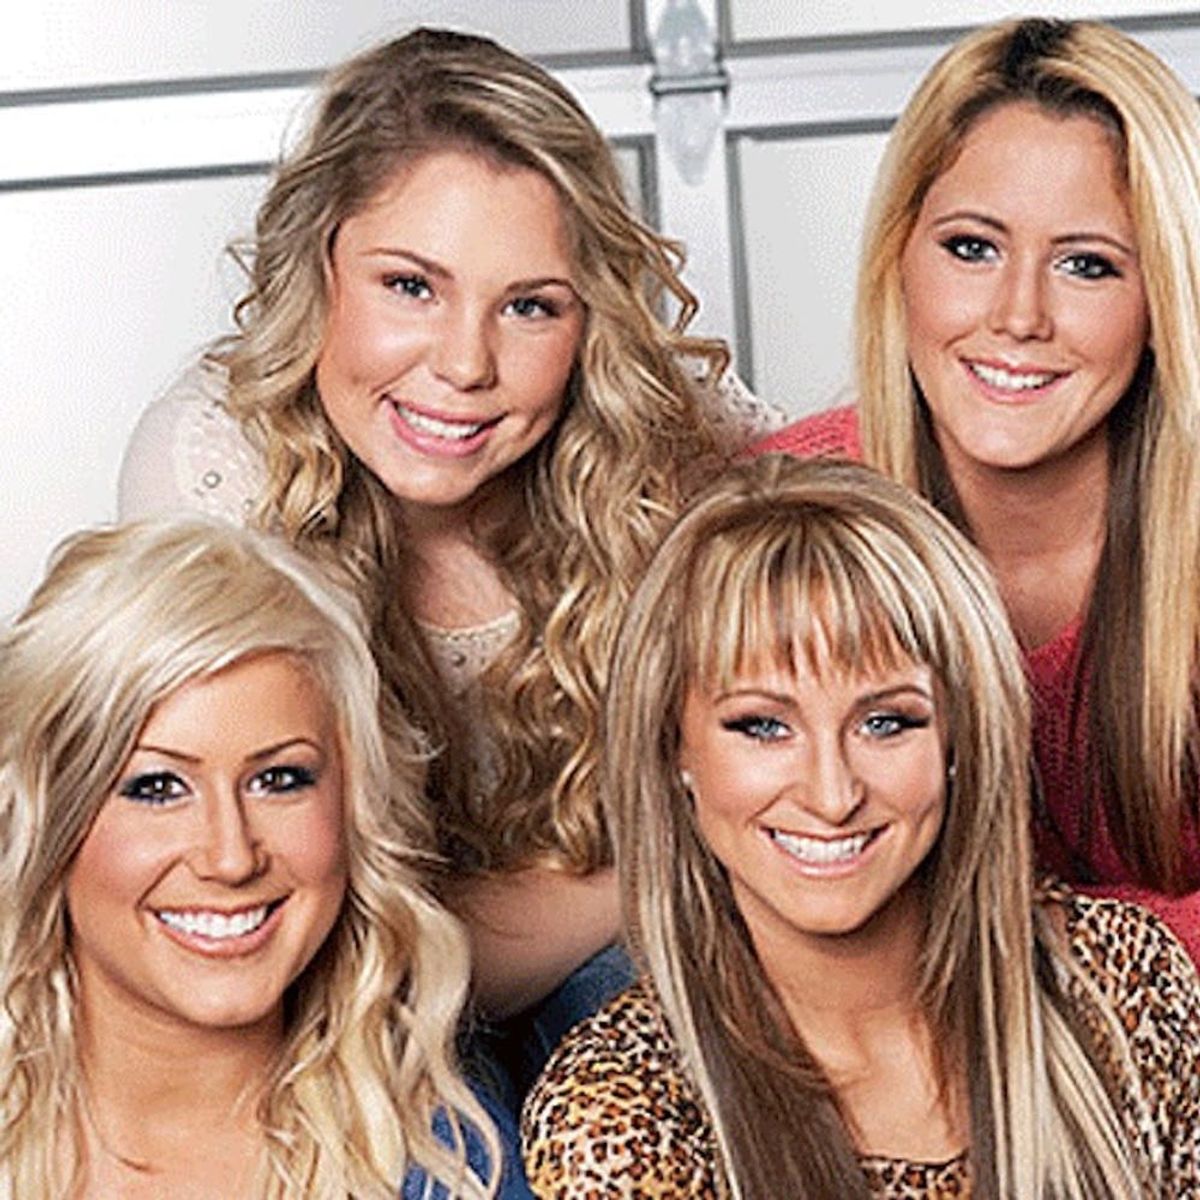 Why Teen Mom Is WAY More Than Just Another Addictive Reality TV Show